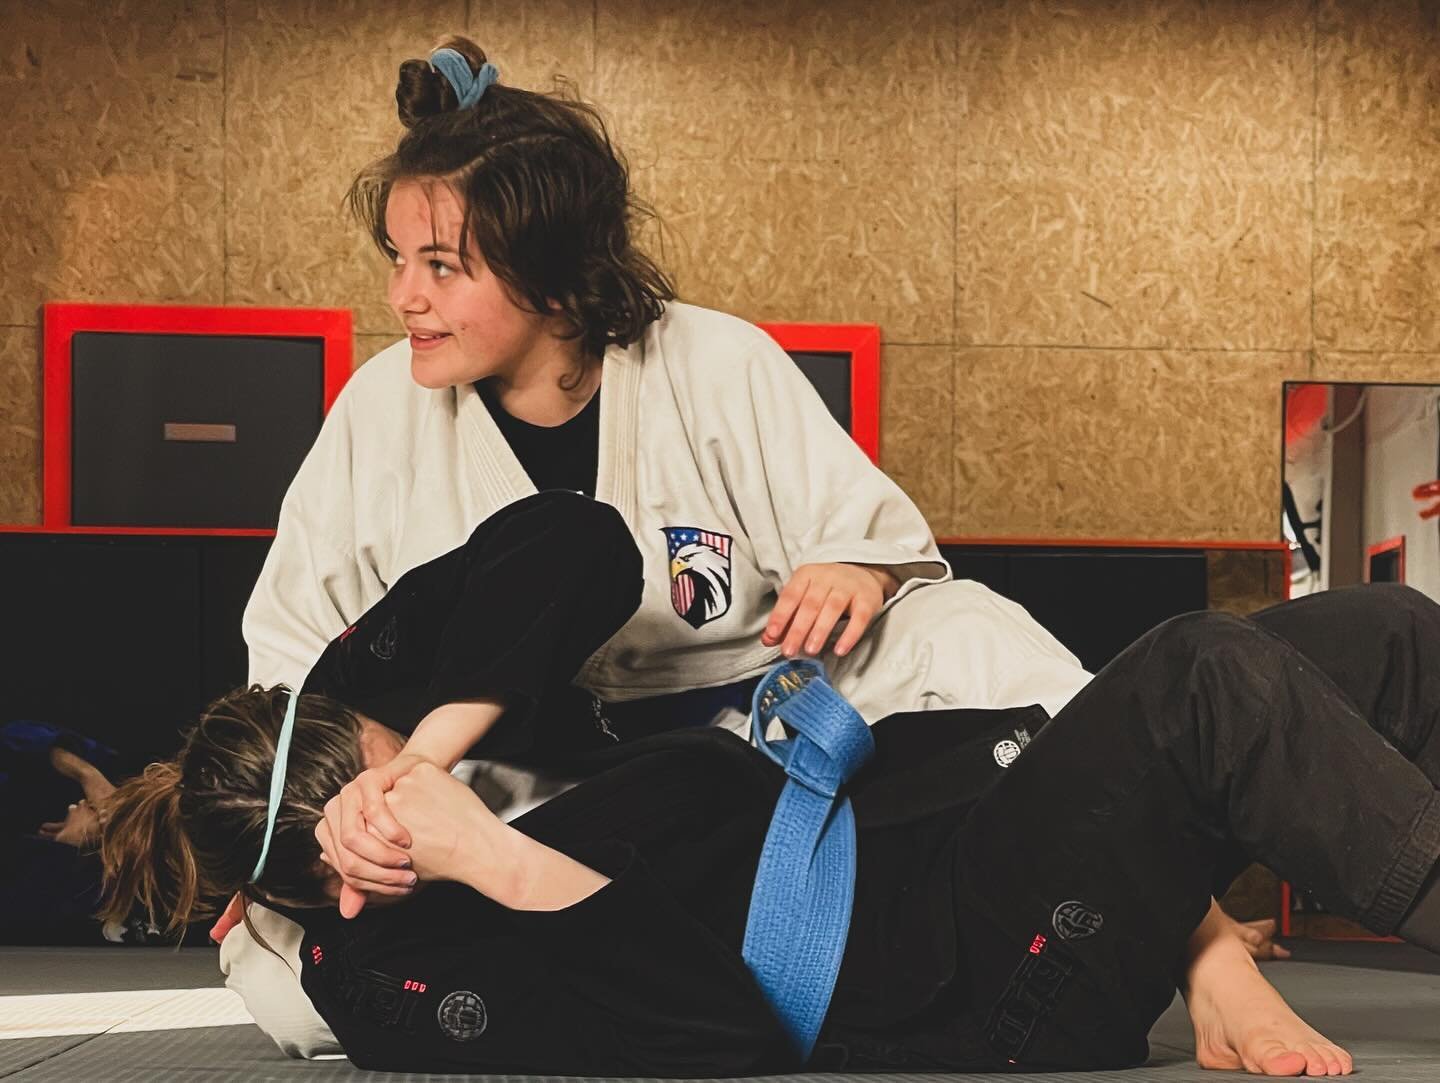 Empowering, inspiring, and unstoppable. 💪 Women in Jiu Jitsu not only challenge the norms but also empower each other to rise stronger together. Join the movement at Dino Jiu Jitsu. Women&rsquo;s Classes- Monday from 7-8pm and FREE Women&rsquo;s cla